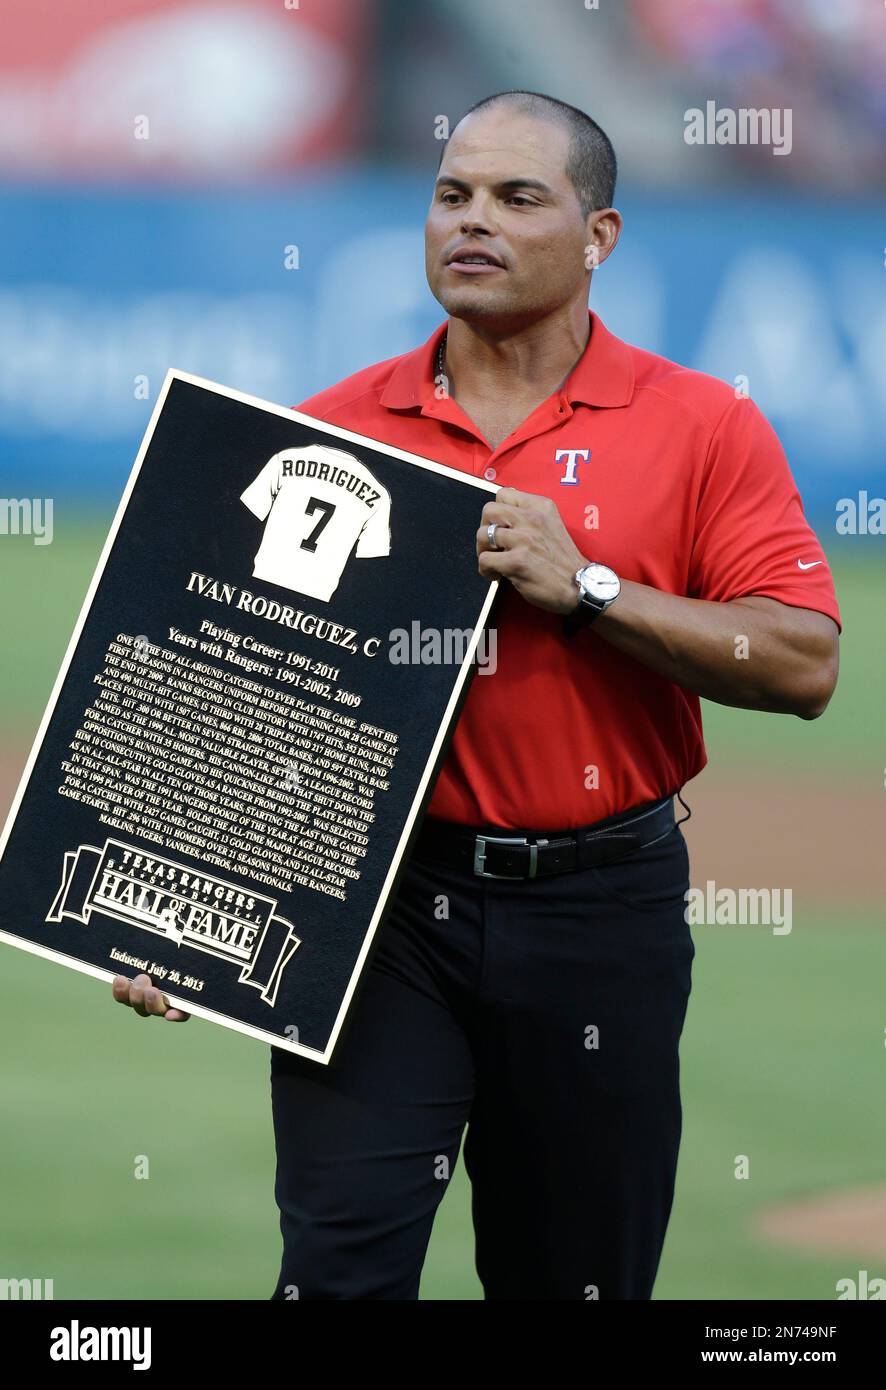 Detroit Tigers - Congratulations to Ivan Pudge Rodriguez on his induction  into the National Baseball Hall of Fame and Museum today!